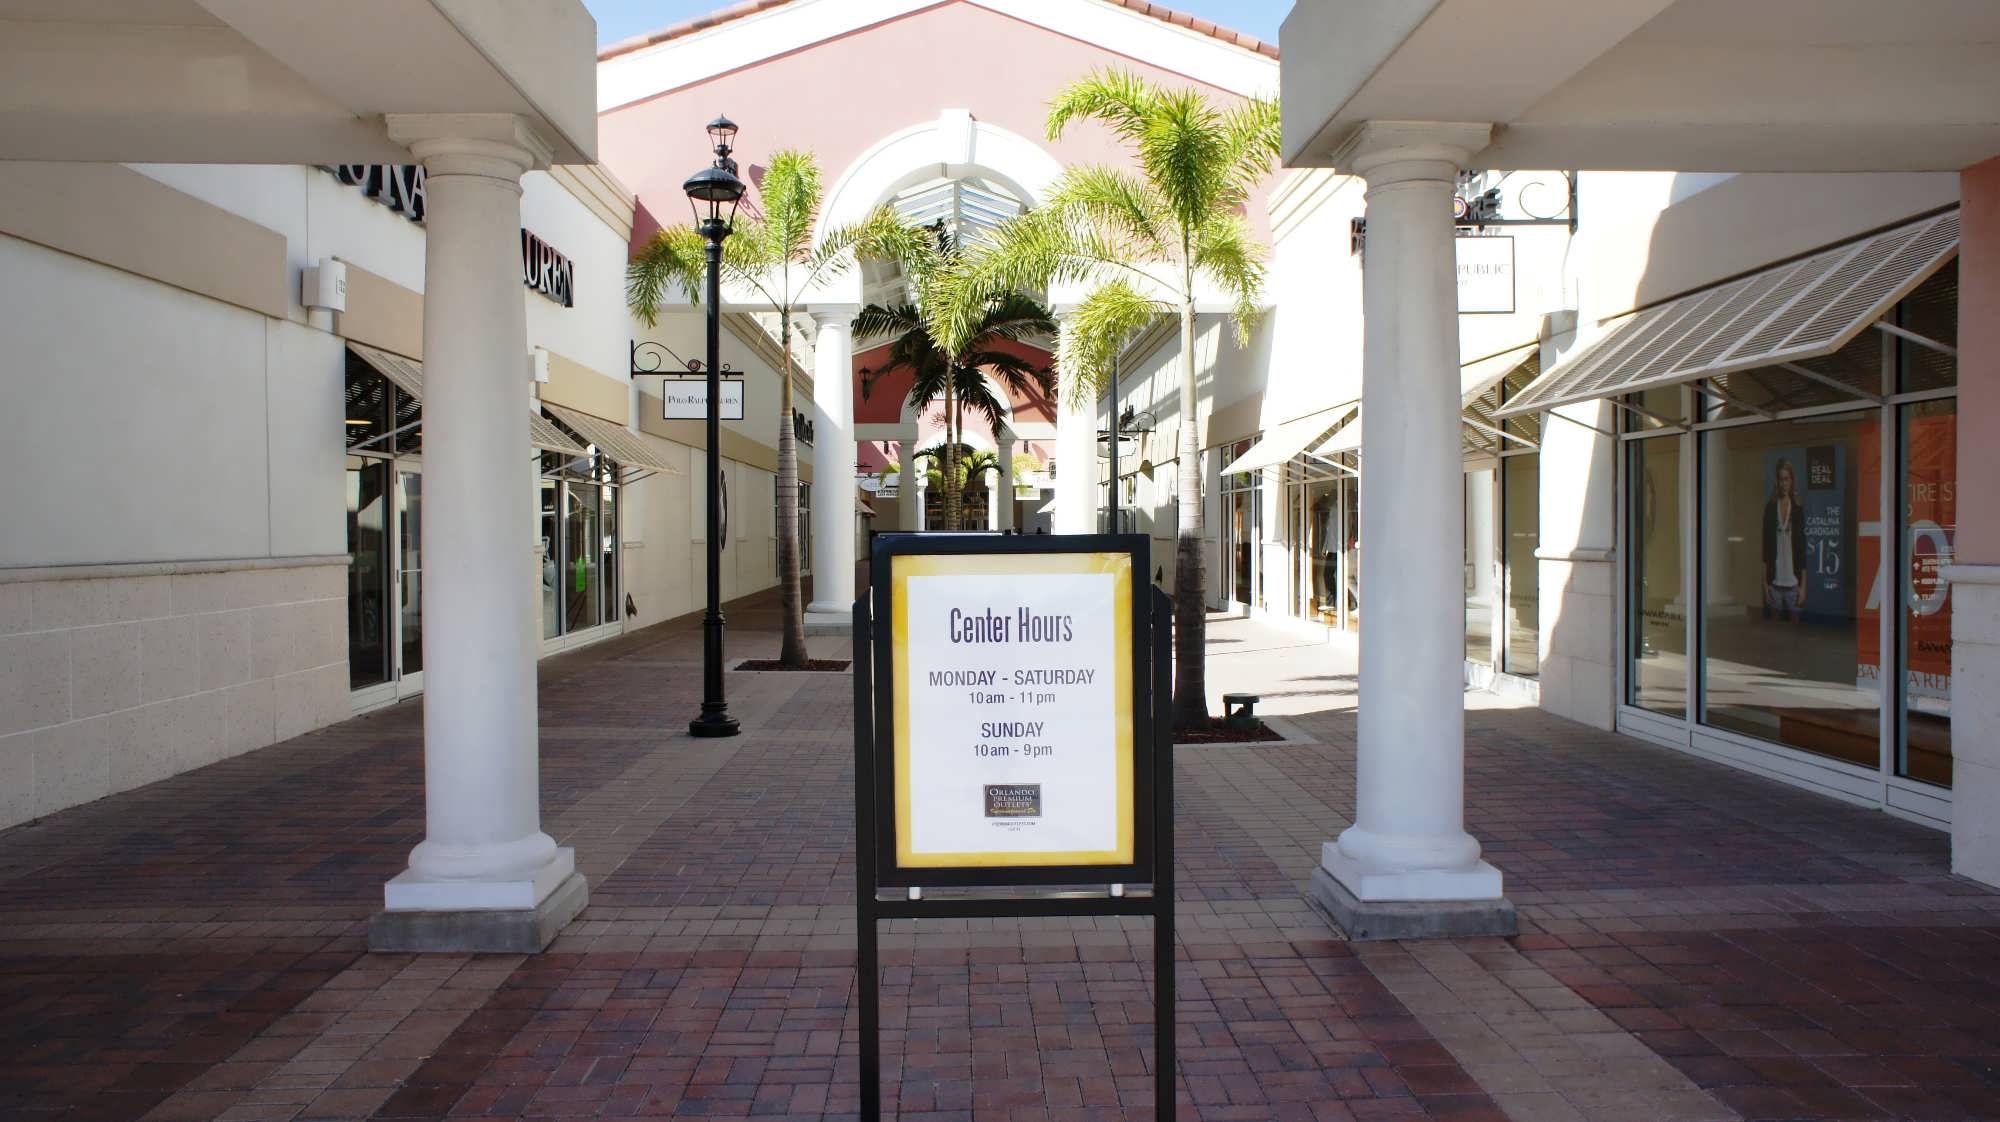 Orlando International Premium Outlets: Closest outlets to Universal Orlando